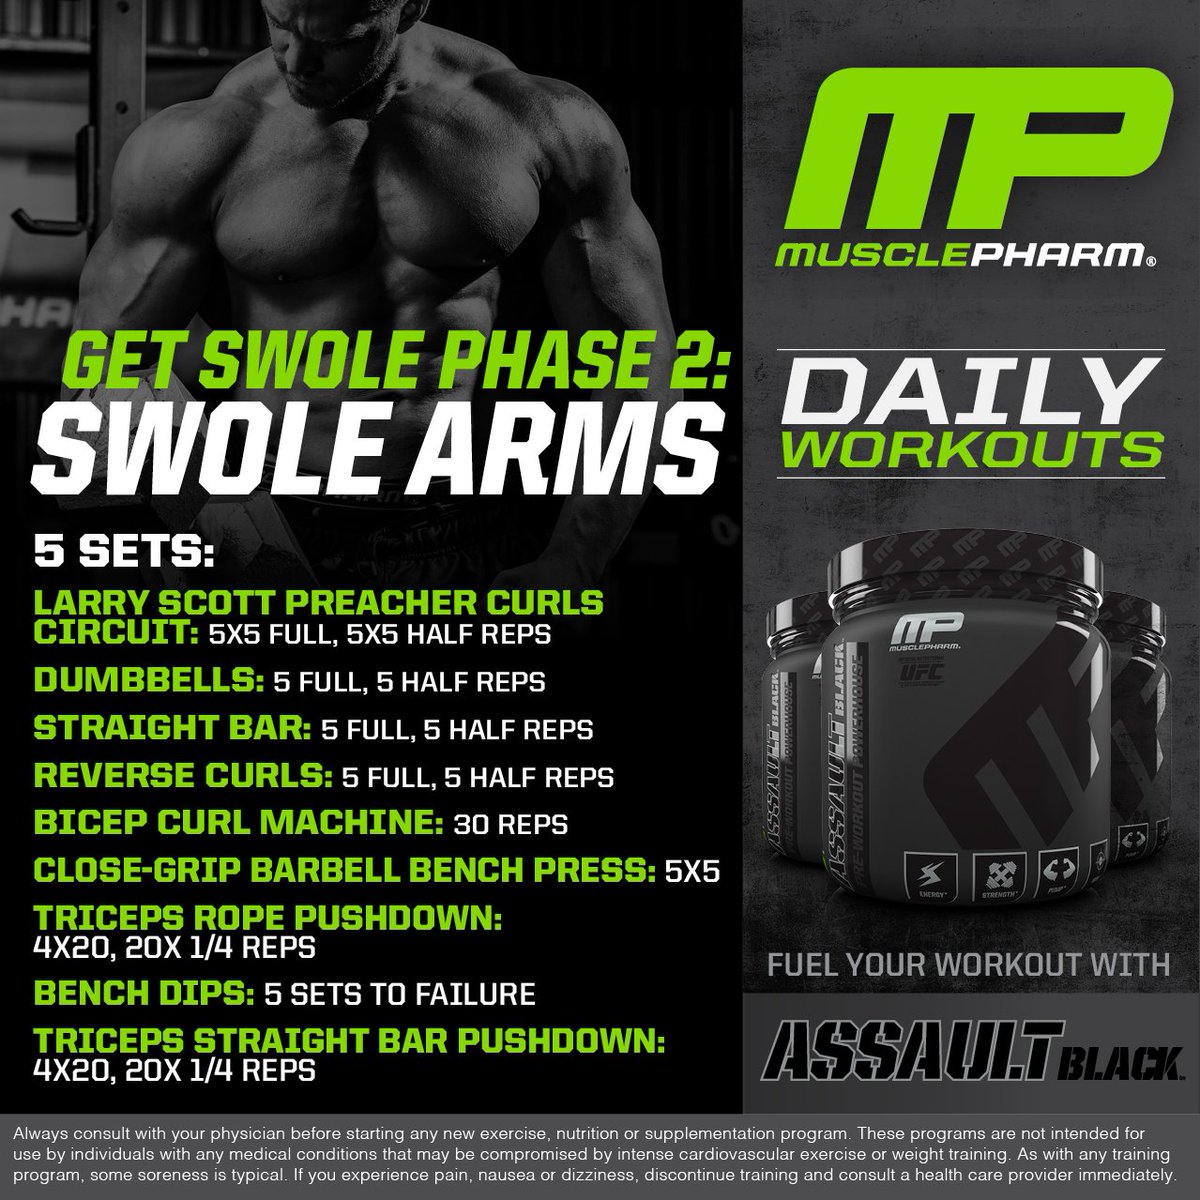 6 Day Musclepharm Arm Workout for Push Pull Legs